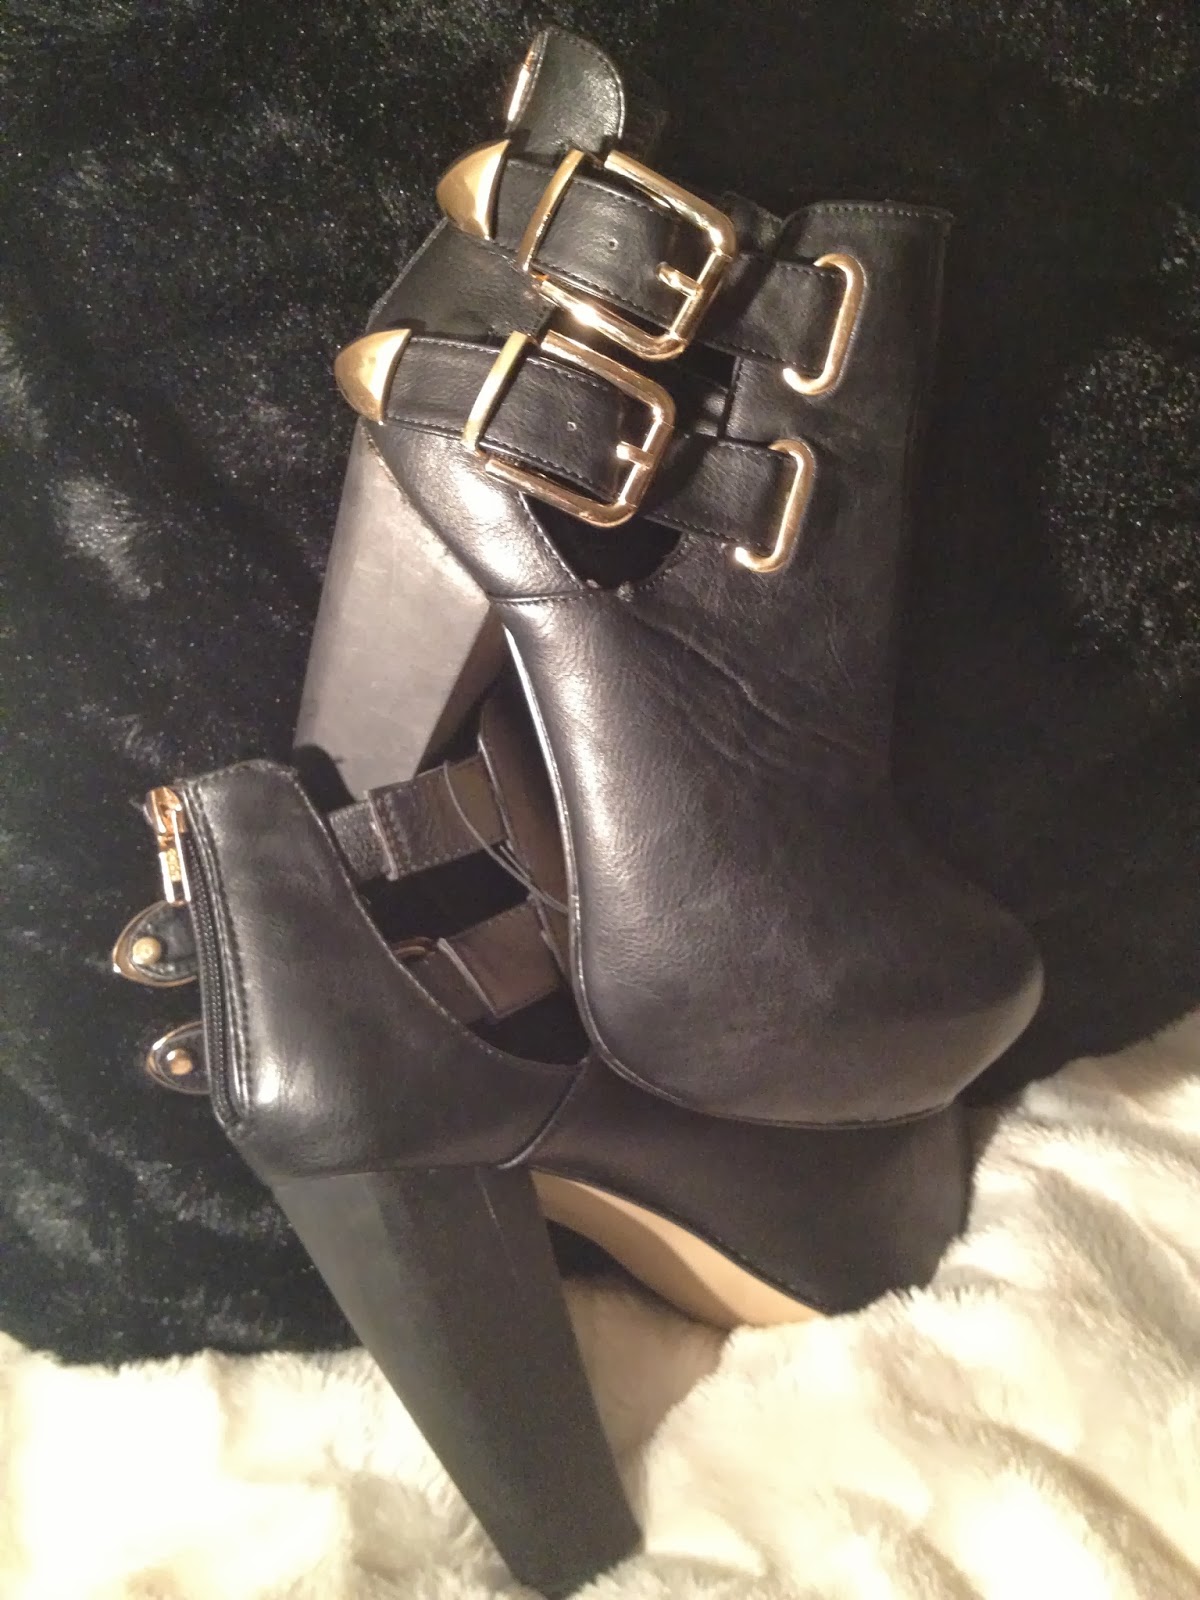 PRODUCT REVIEW: Primark Platform Buckled Boots | STYLED INTO FASHION